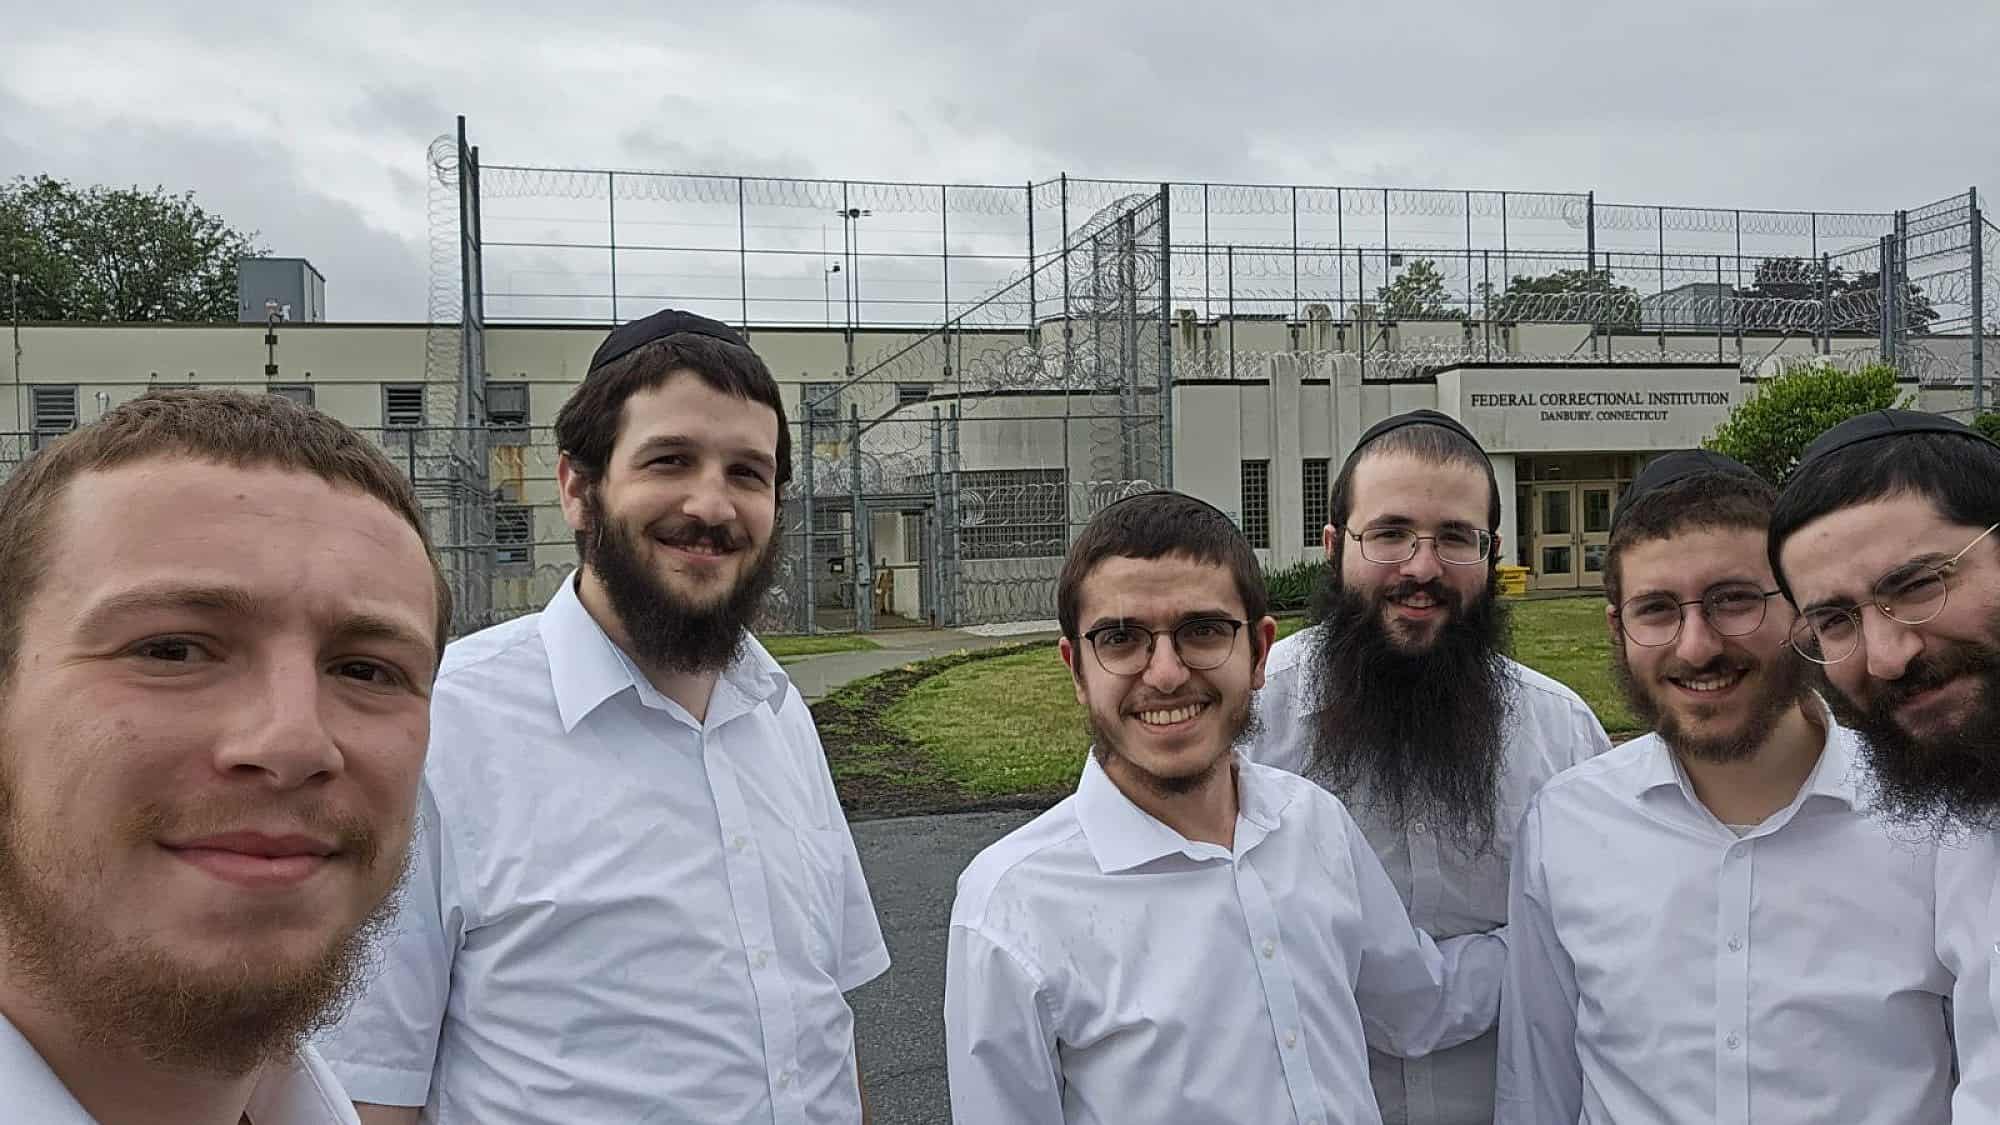 Rabbi Yisroel Baumgarten (left), a volunteer for the Aleph Institute who visits prisons ahead of the the High Holidays, with other volunteers gathered for a training course at the Federal Correctional Institution in Danbury, Conn. Credit: Courtesy of Rabbi Yisroel Baumgarten.